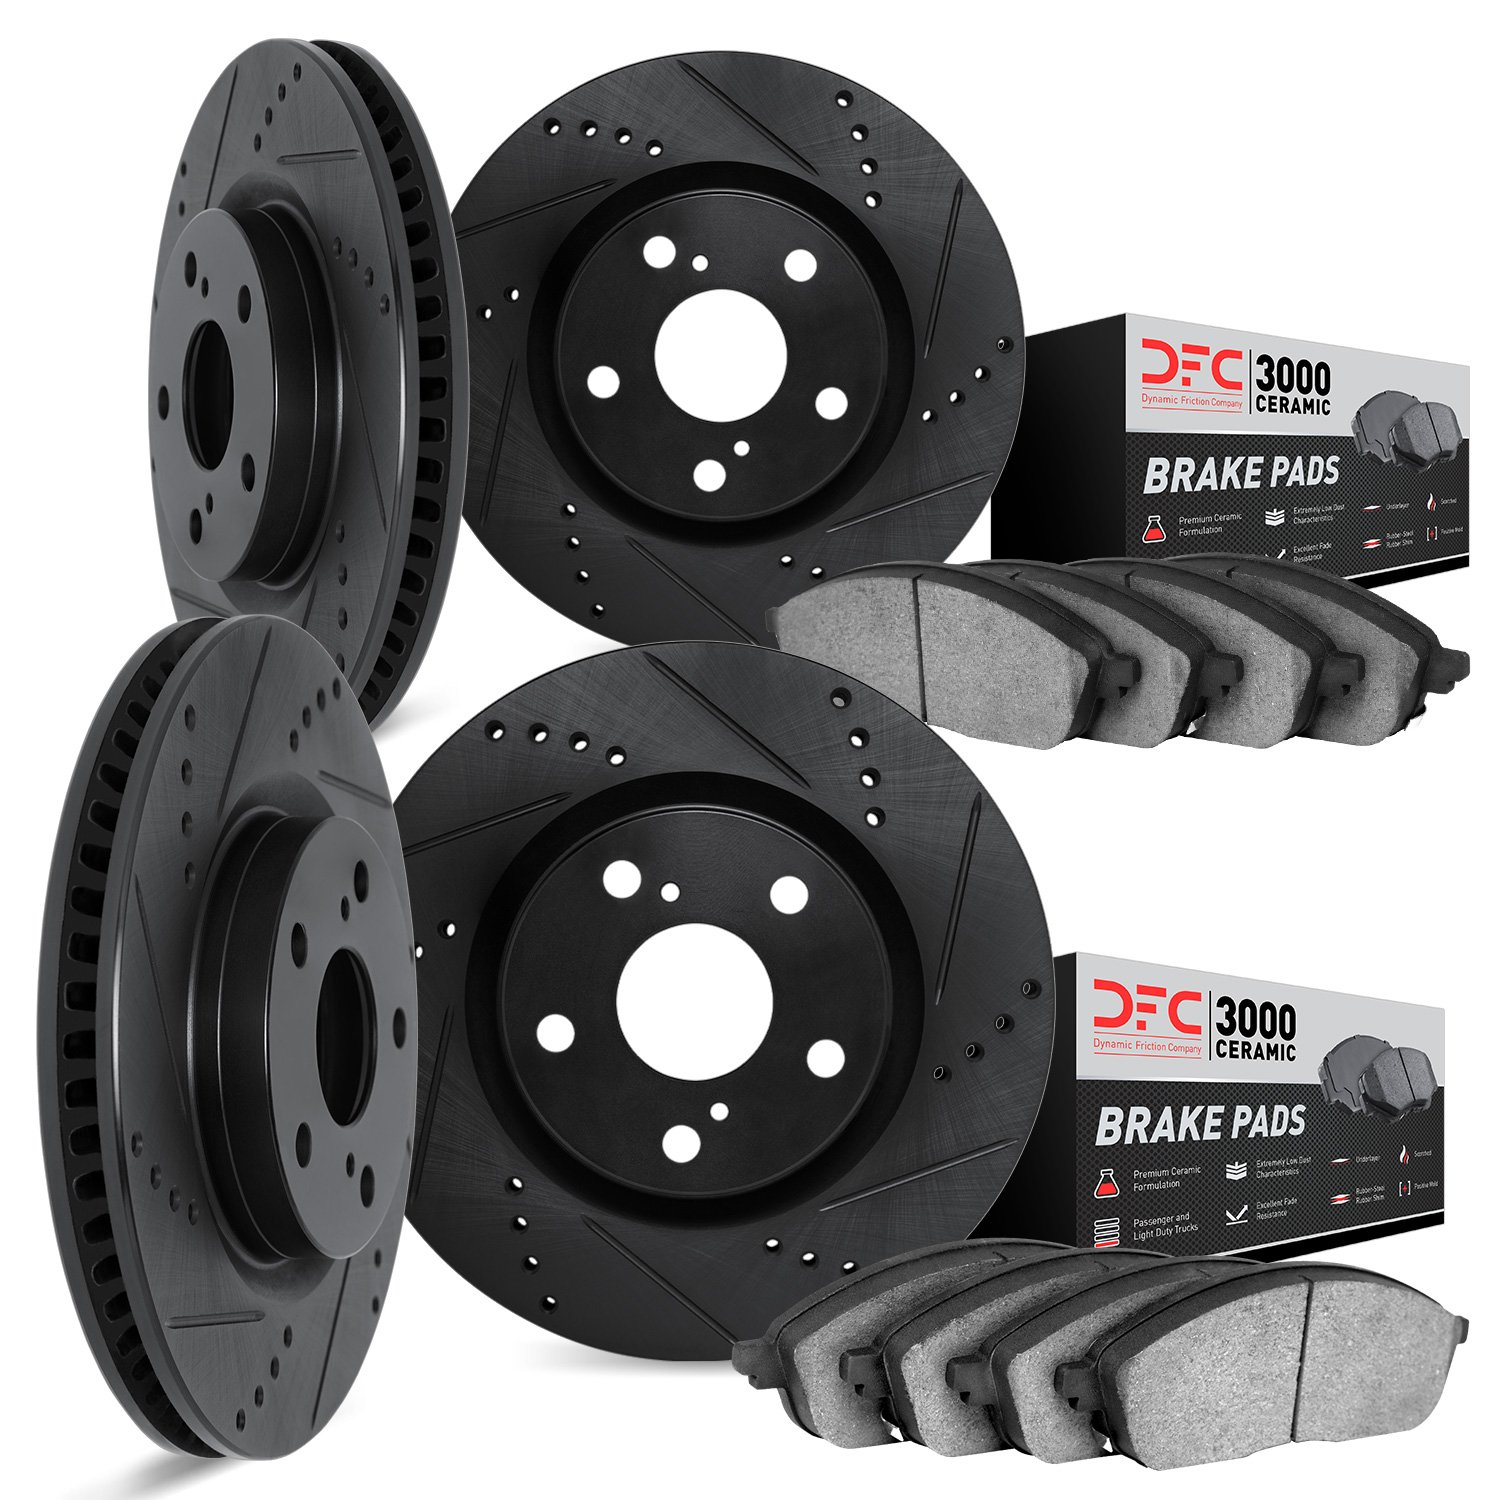 8304-31079 Drilled/Slotted Brake Rotors with 3000-Series Ceramic Brake Pads Kit [Black], 2012-2019 BMW, Position: Front and Rear